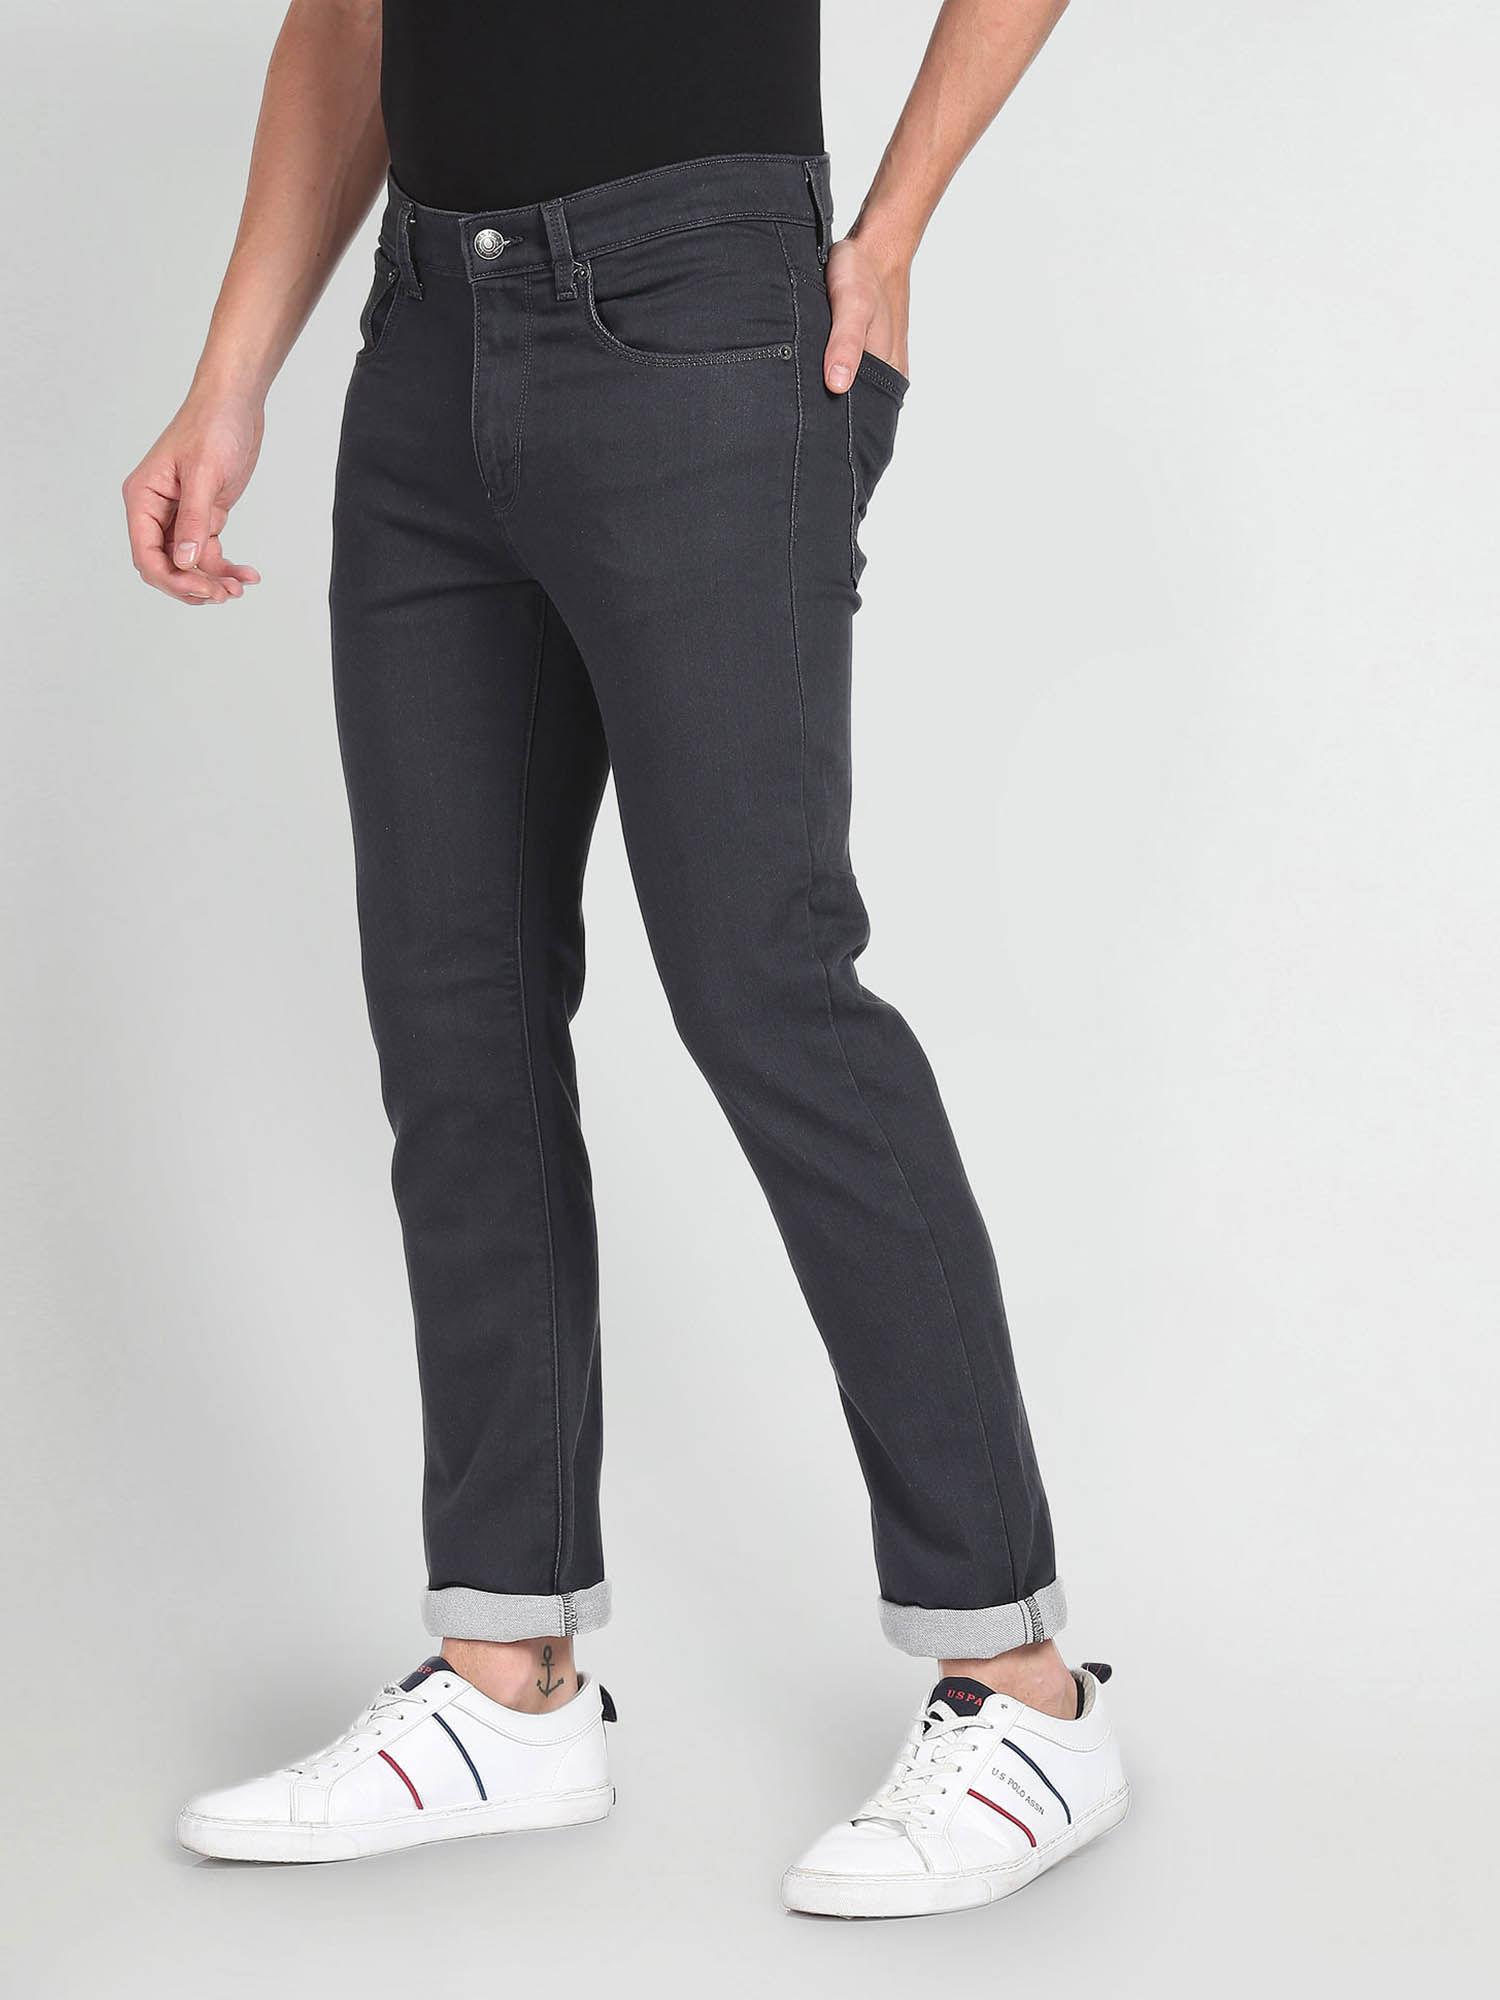 Regallo Skinny Fit Rinsed Jeans